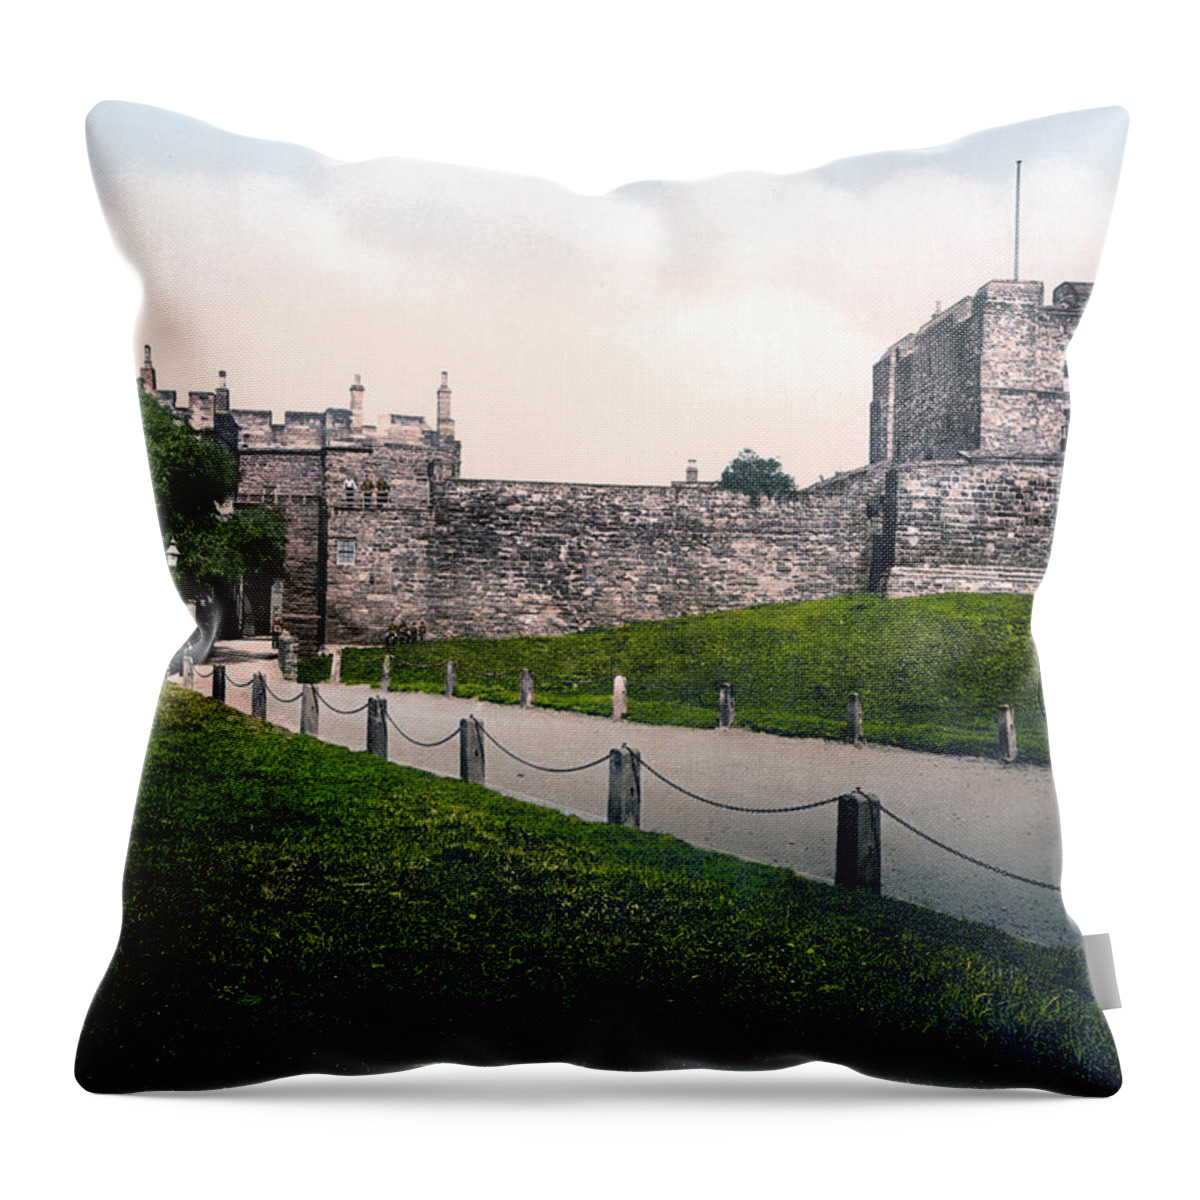 Carlisle Throw Pillow featuring the photograph Carlisle Castle - England by International Images